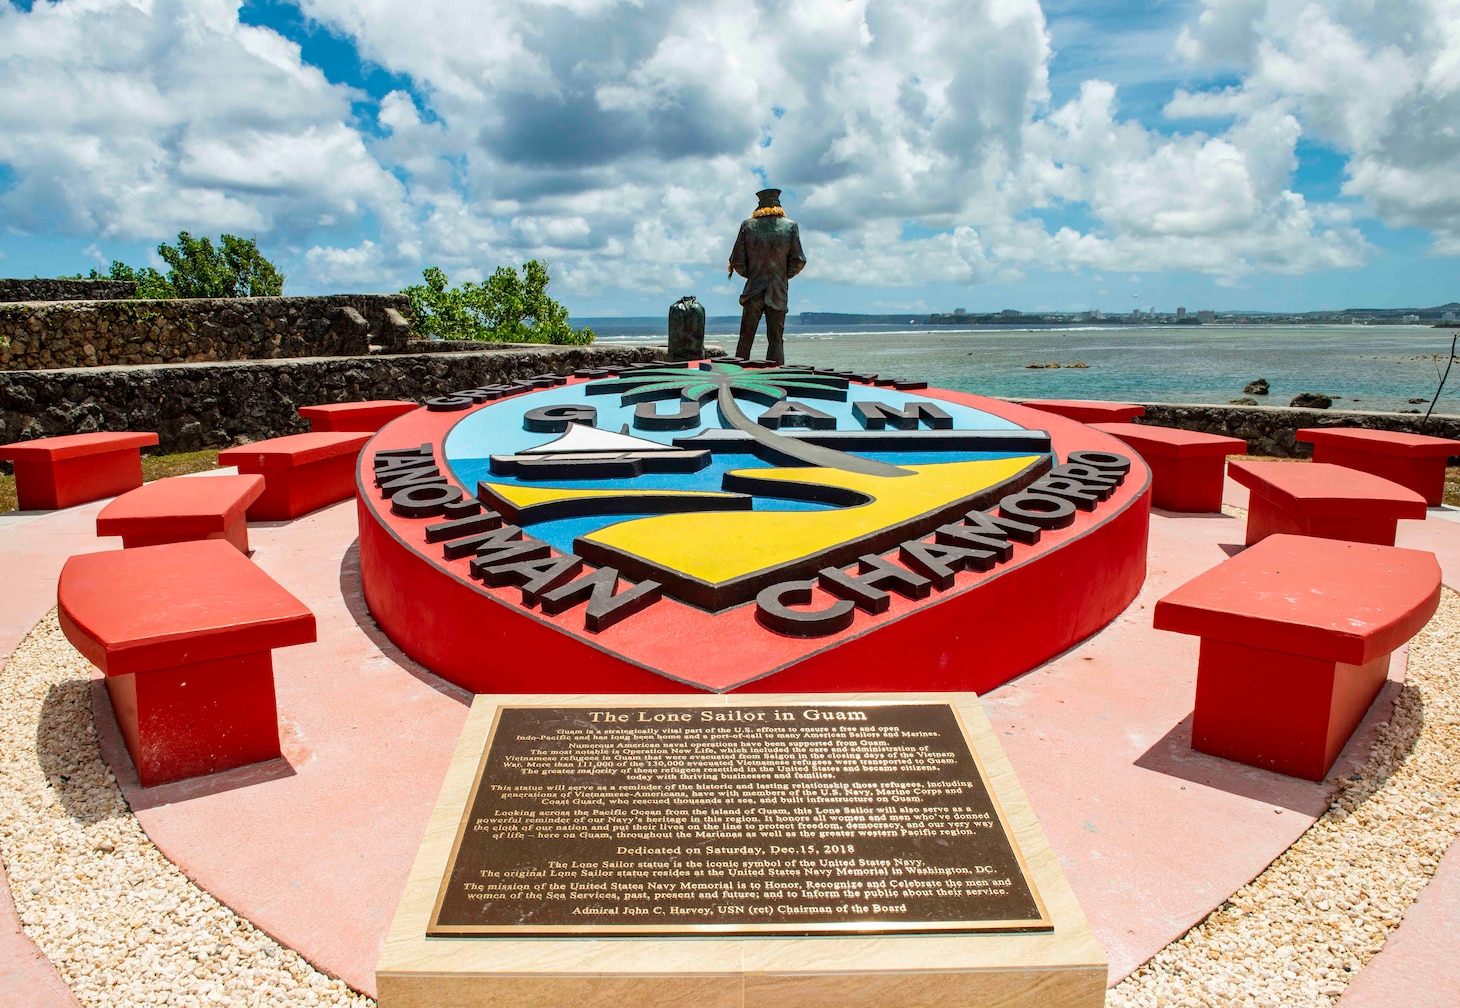 HAGÅTÑA, Guam (April 30, 2019) – The Lone Sailor statue stands watch at the Ricardo J. Bordallo Governor's Complex in Hagåtña April 30. Local and military officials, and members of the Vietnamese-American community,attended the event at Lone Sailor statue, a symbol of the significant relationship between the Navy, the sea services, Guam, and the thousands of Vietnamese citizens who found refuge on the island during Operation New Life in the ending days of the Vietnam War.